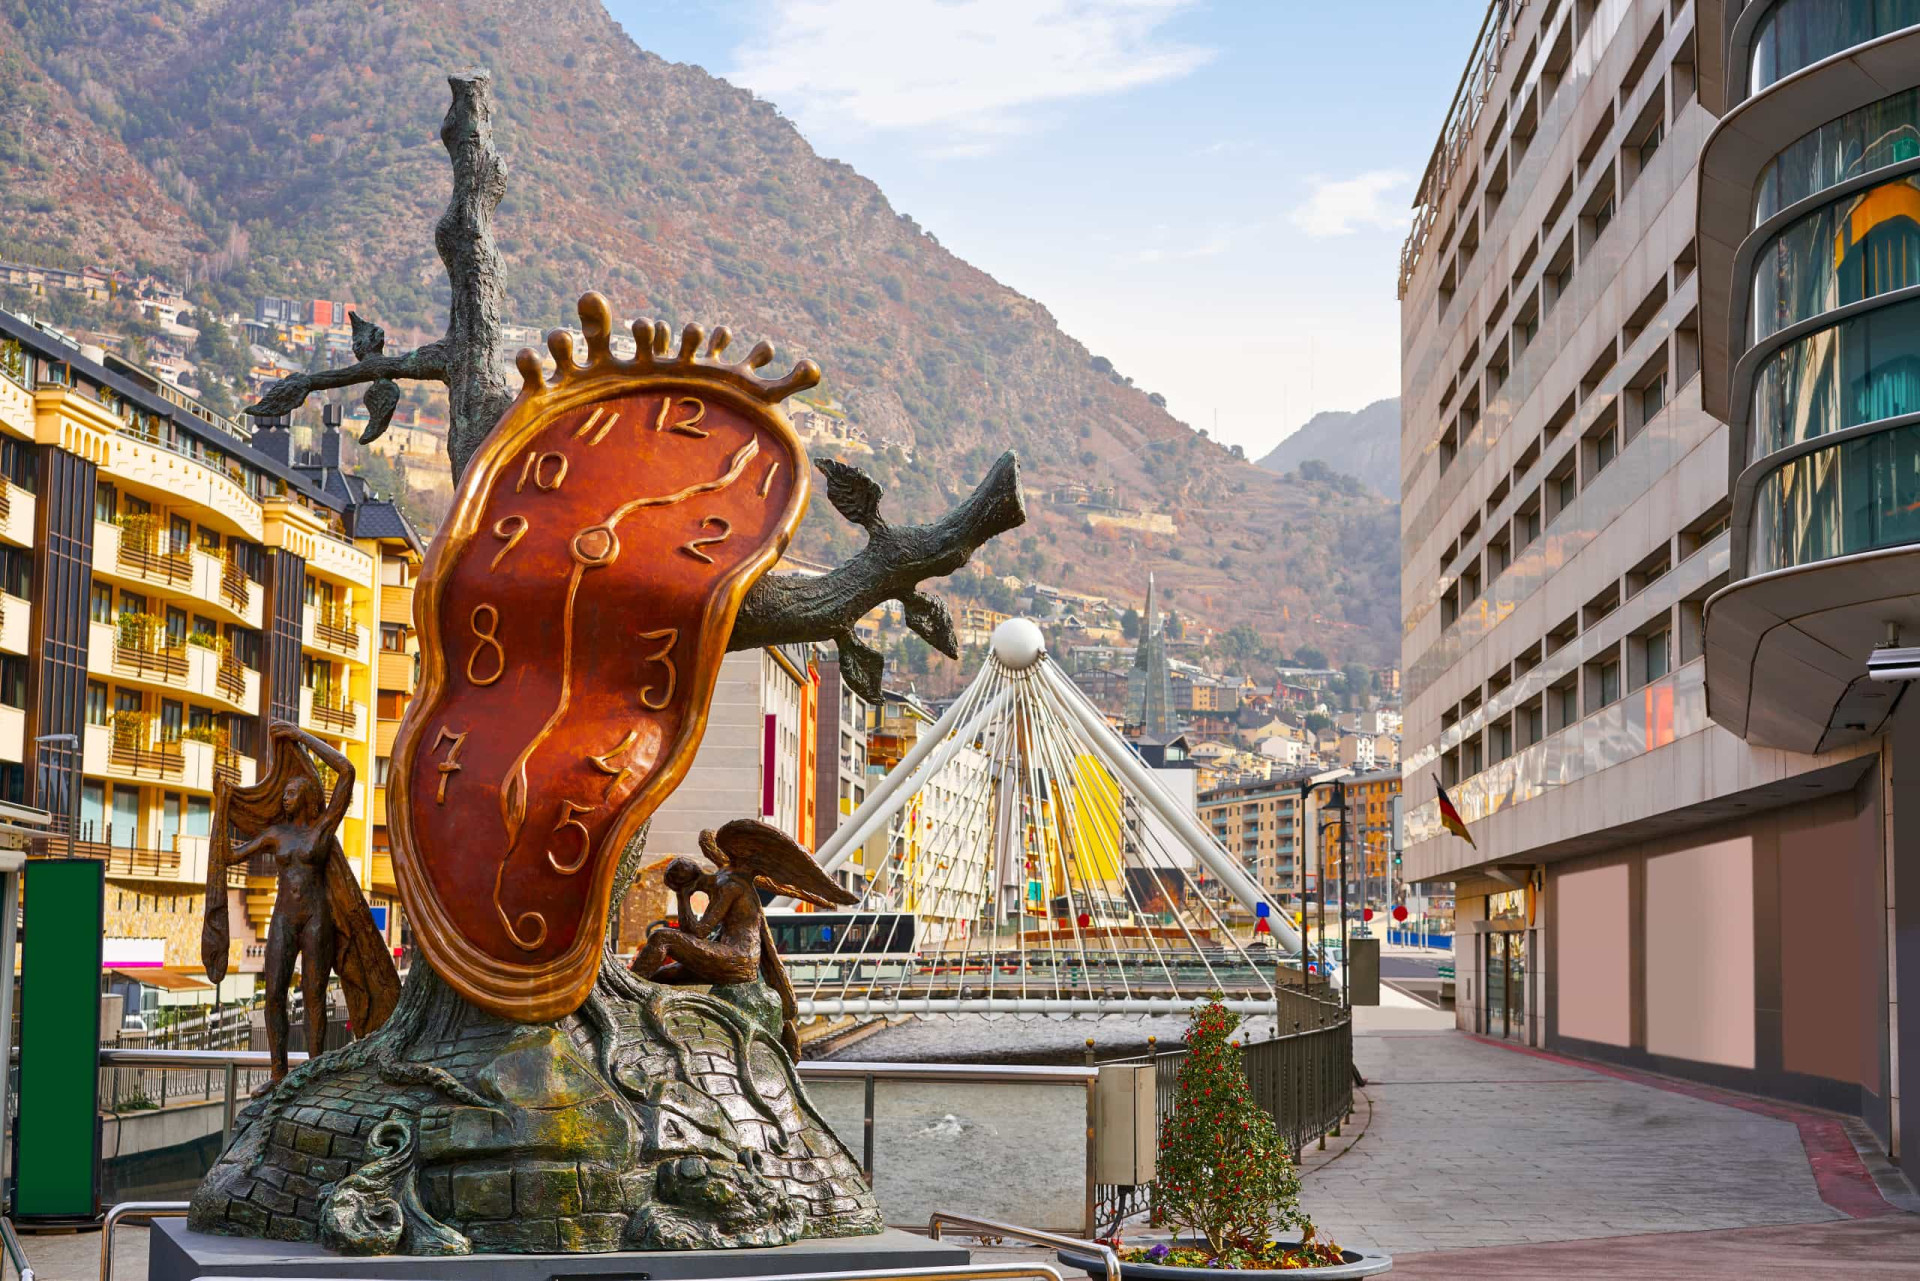 <p>Andorra la Vella also boasts an original work from a world-renowned Spanish artist. 'La Noblesse du Temps' is a massive, 16-foot (5-m) tall bronze <a href="https://www.starsinsider.com/lifestyle/363561/sculptures-to-inspire-the-artist-in-you" rel="noopener">sculpture</a> cast by hand by Salvador Dalí himself in 1984.</p><p>You may also like:<a href="https://www.starsinsider.com/n/177433?utm_source=msn.com&utm_medium=display&utm_campaign=referral_description&utm_content=597567en-za"> 11 cities around the world that may run out of water</a></p>